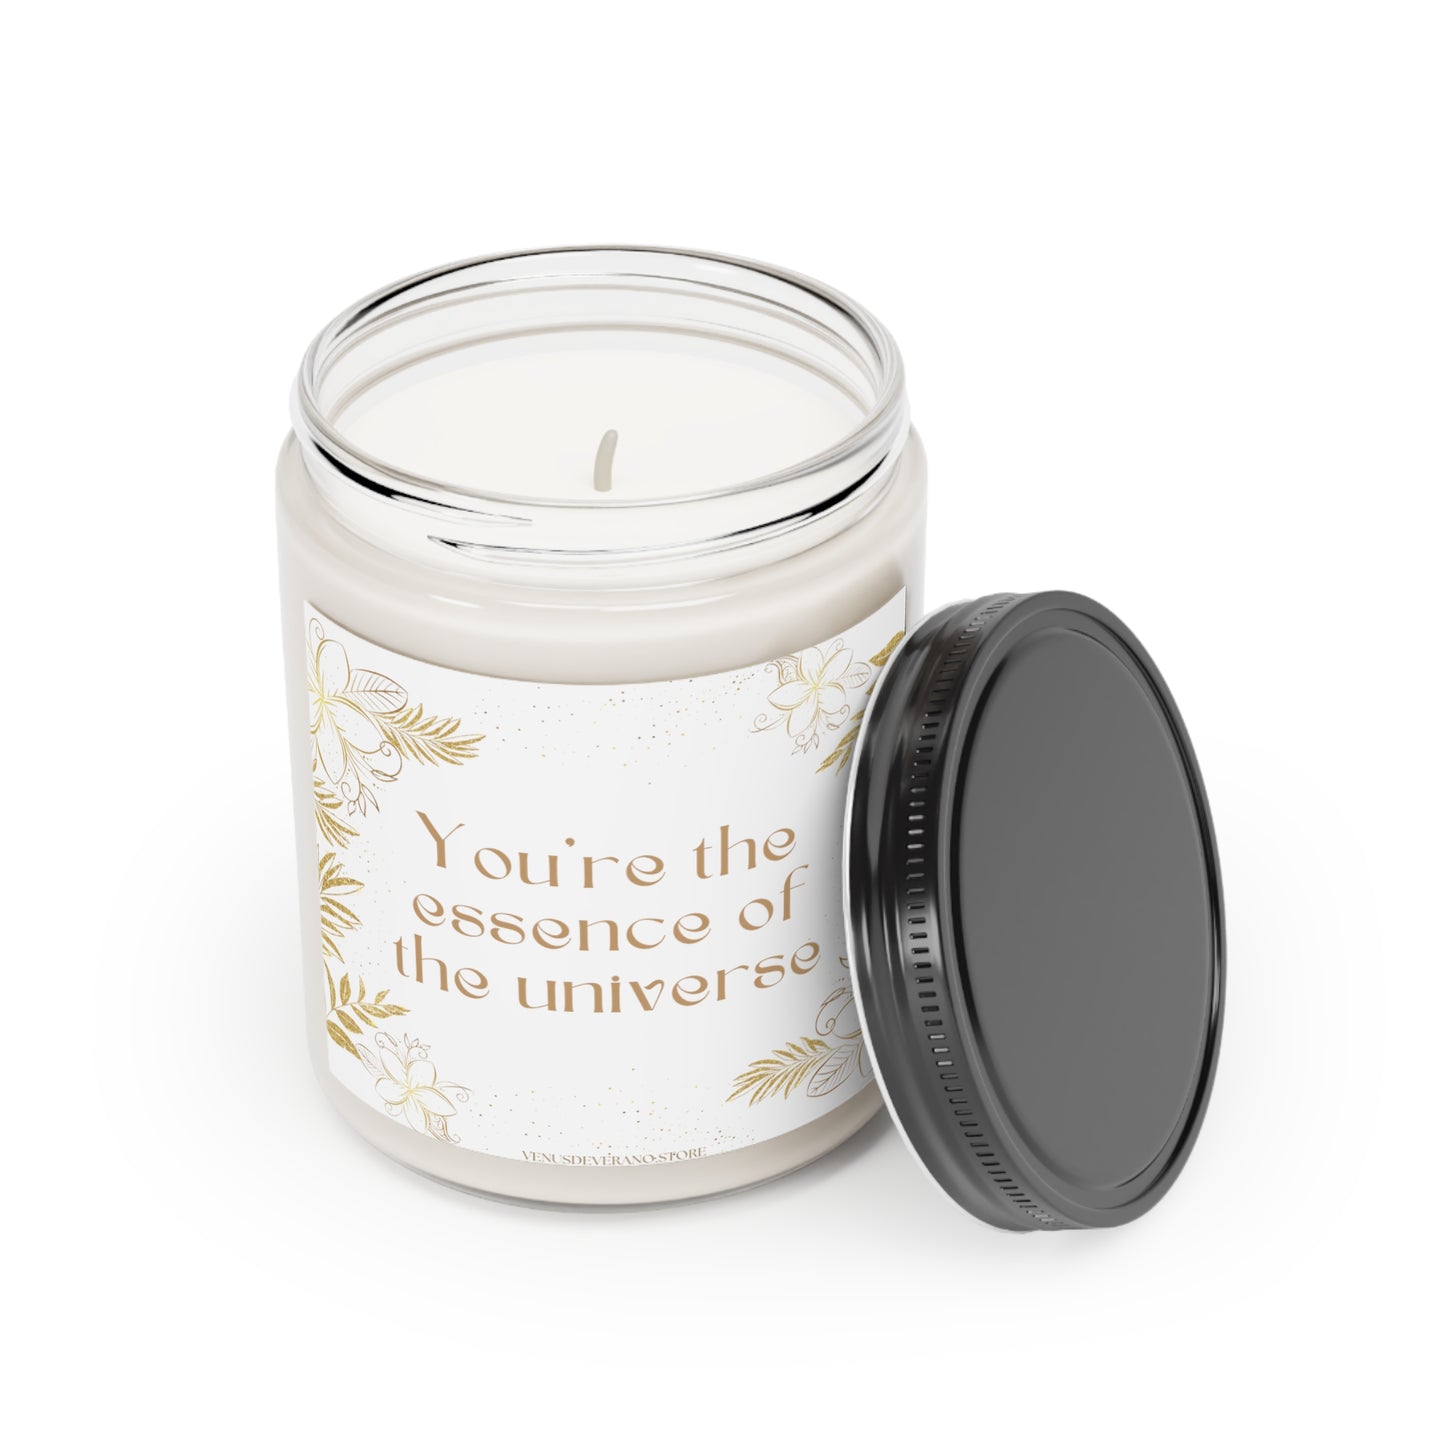 Scented Candle, 9oz - You're the essence of the UNIVERSE - Made from vegan soy coconut wax, hand-poured | 2 ambrosial fragrances available, Cinnamon Stick and Vanilla.